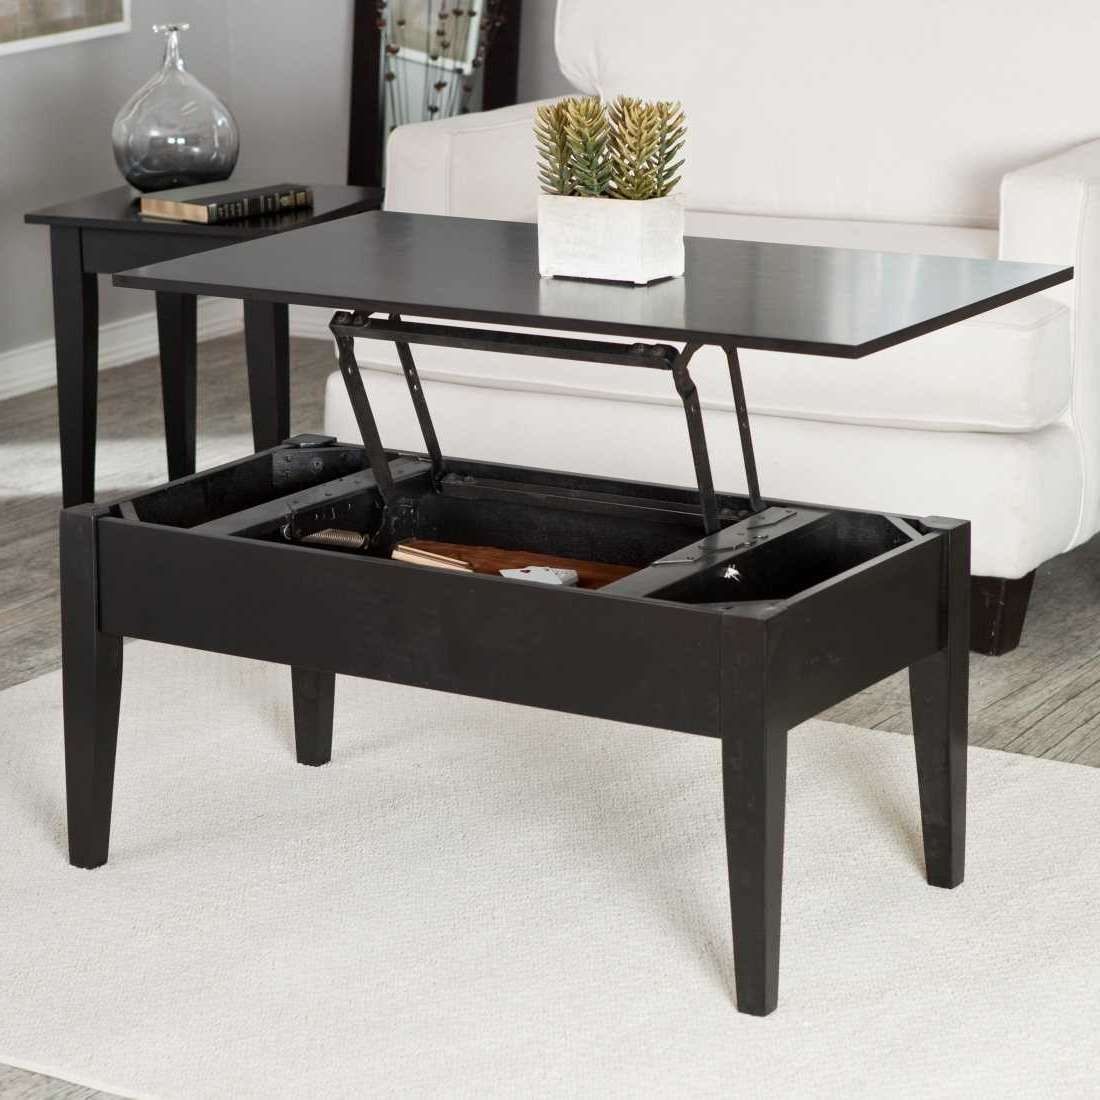 Most Recent Pull Up Coffee Tables Pertaining To Lift Up Coffee Table – Rpisite (View 1 of 20)